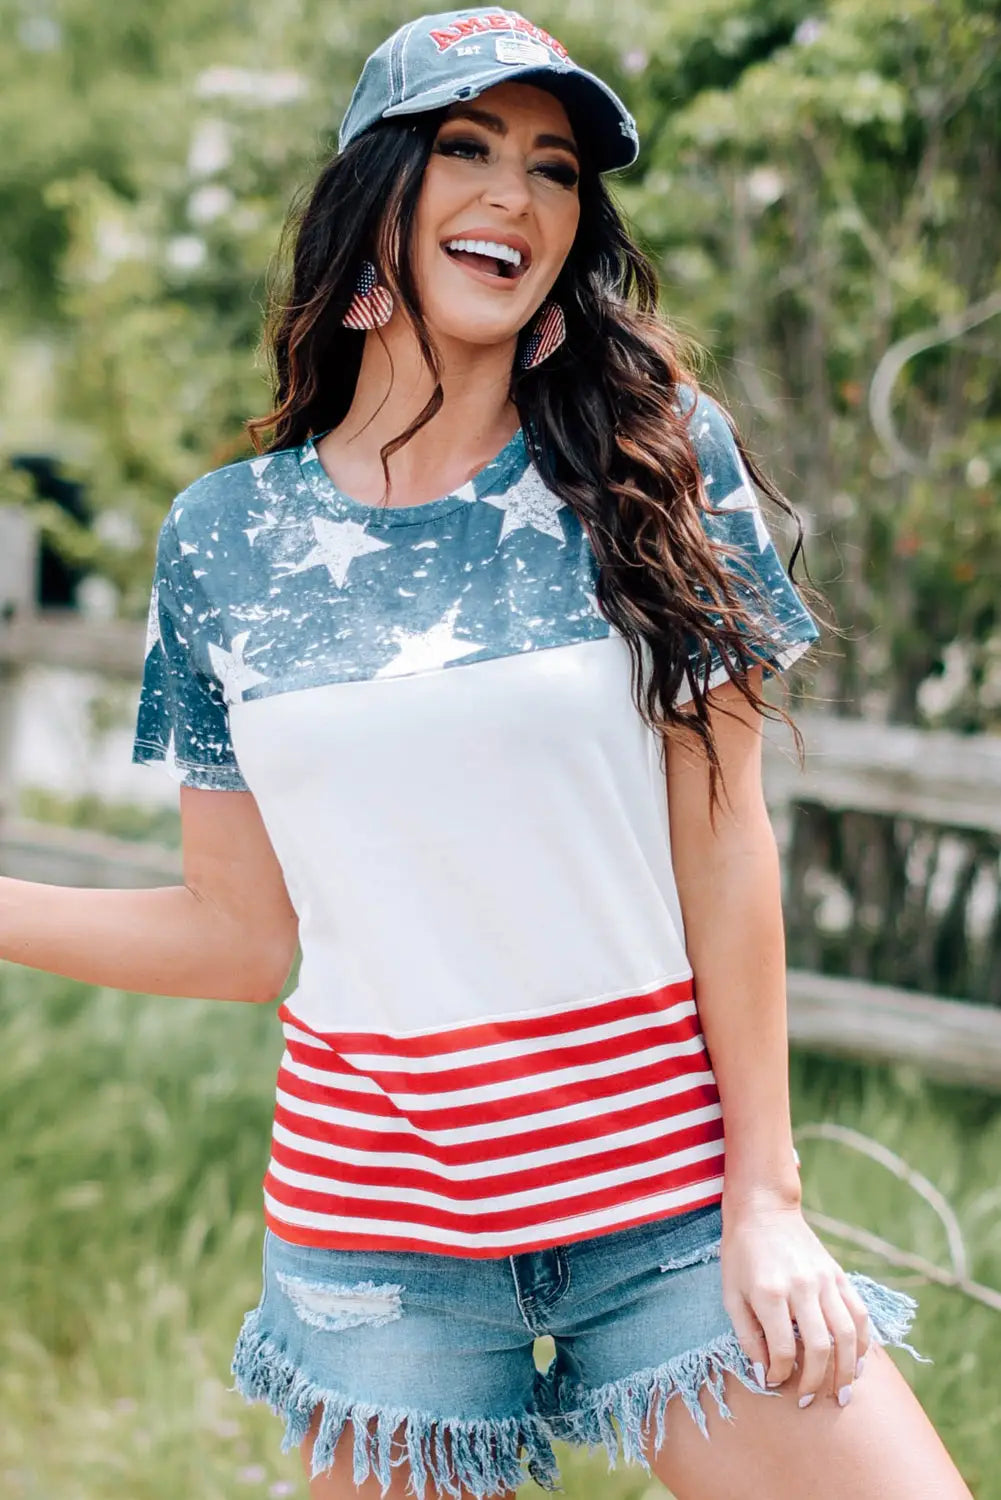 The us stars and stripes inspired top - t-shirts